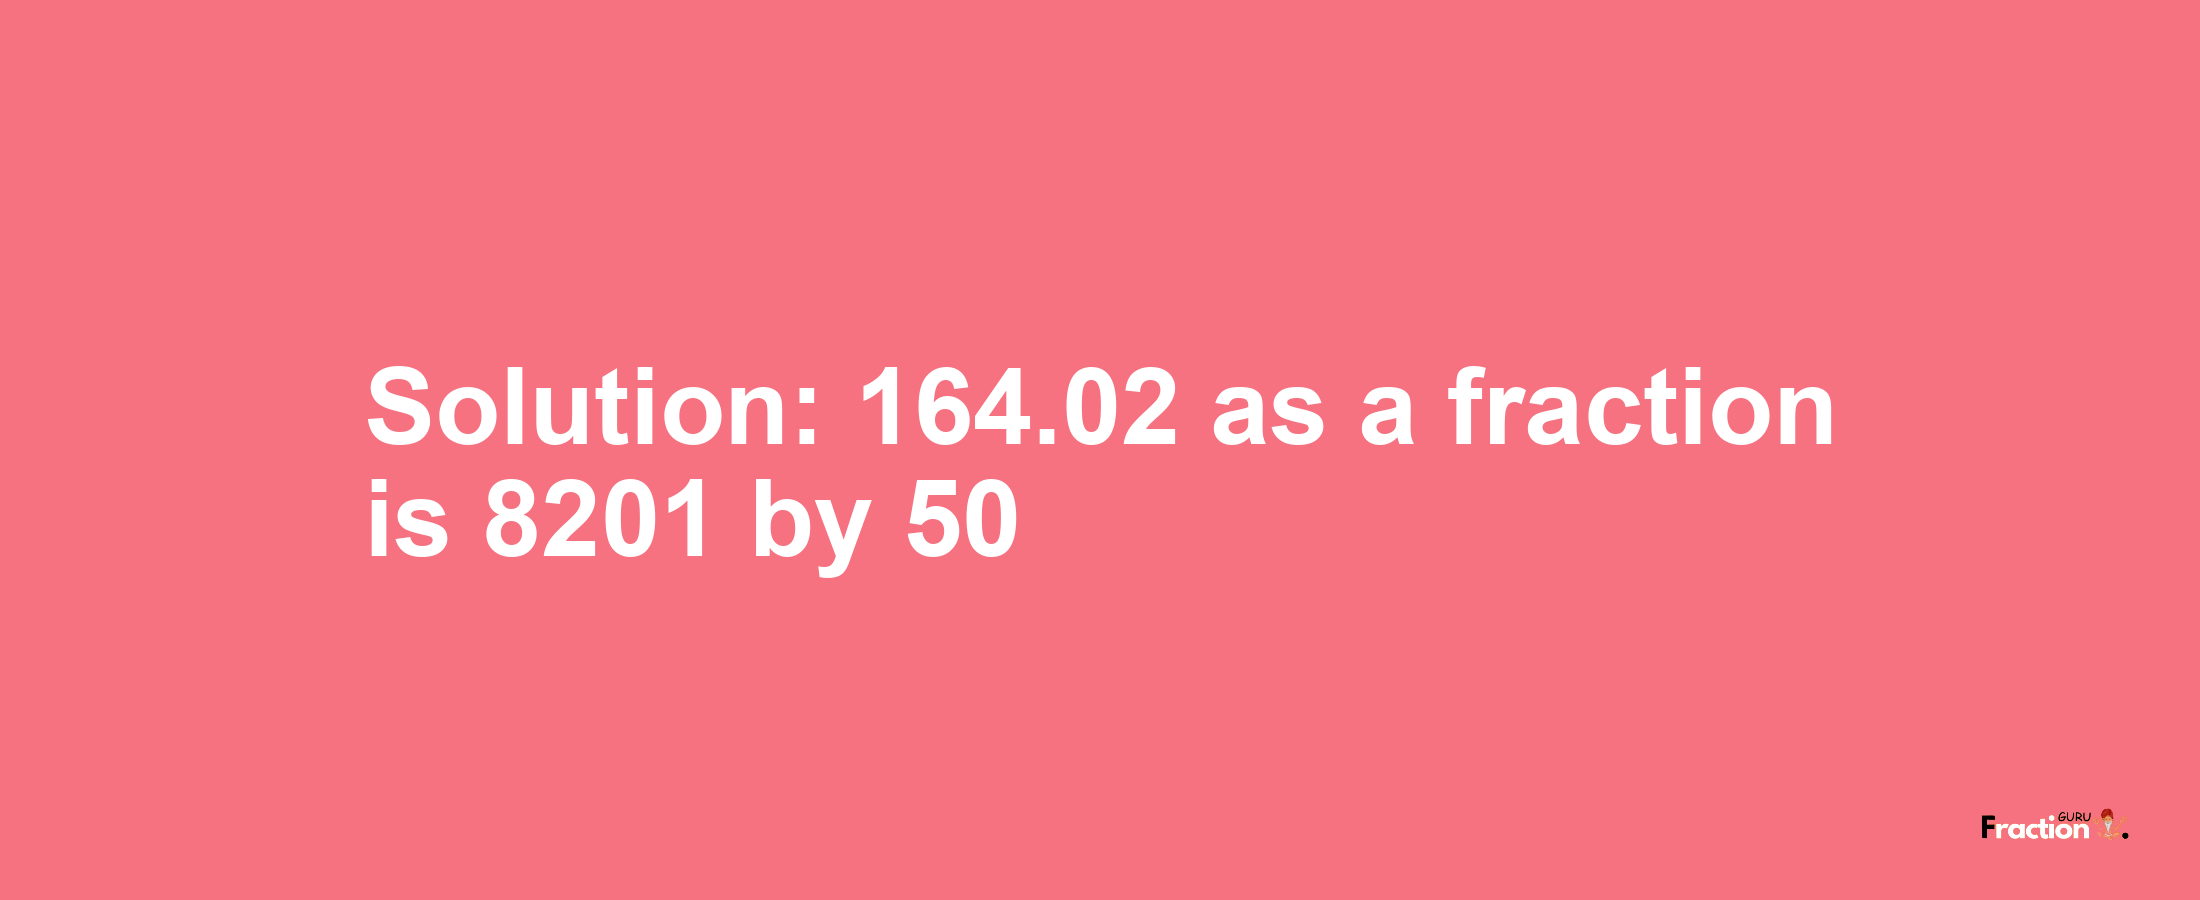 Solution:164.02 as a fraction is 8201/50